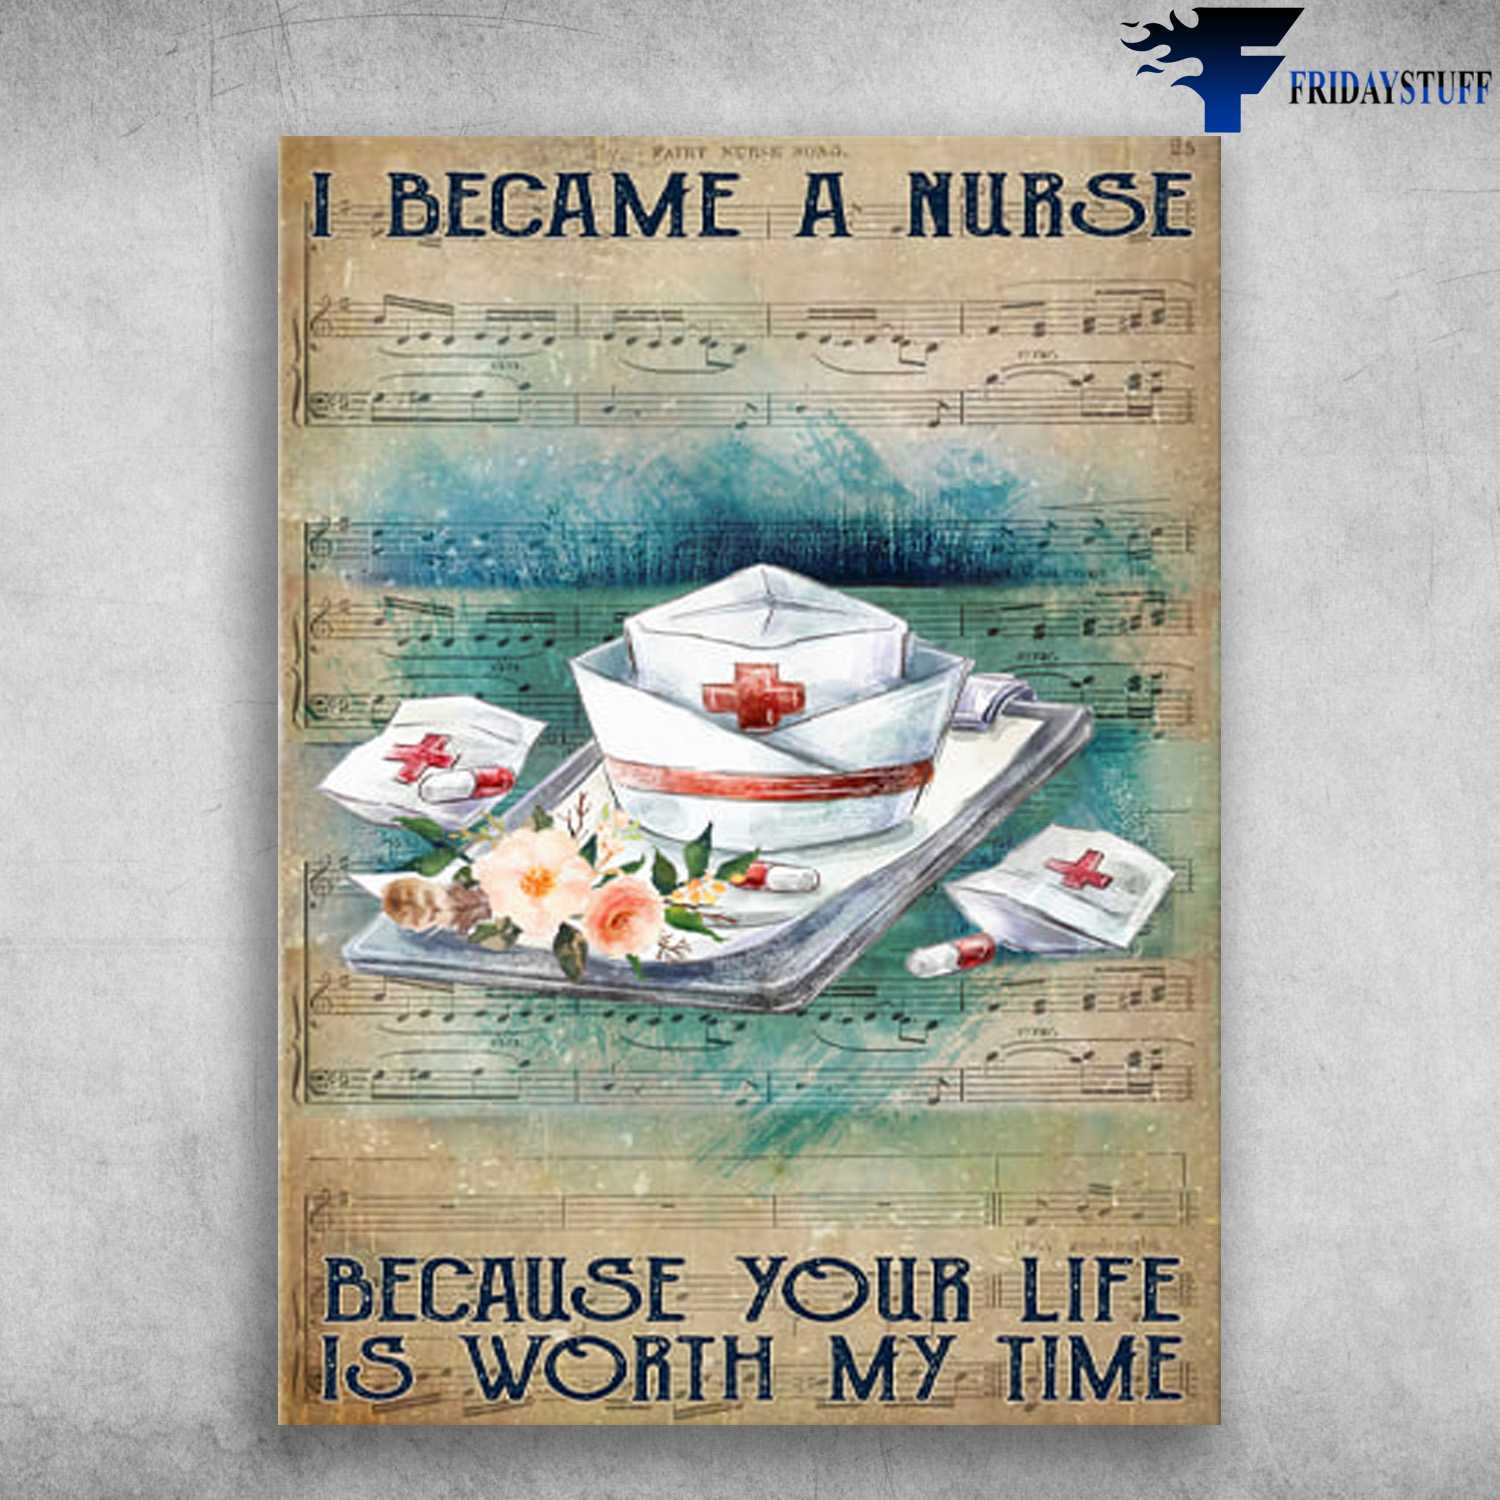 Nurse Poster, Music Sheet - I Became A Nurse, Because Your Life Is Worth My Time